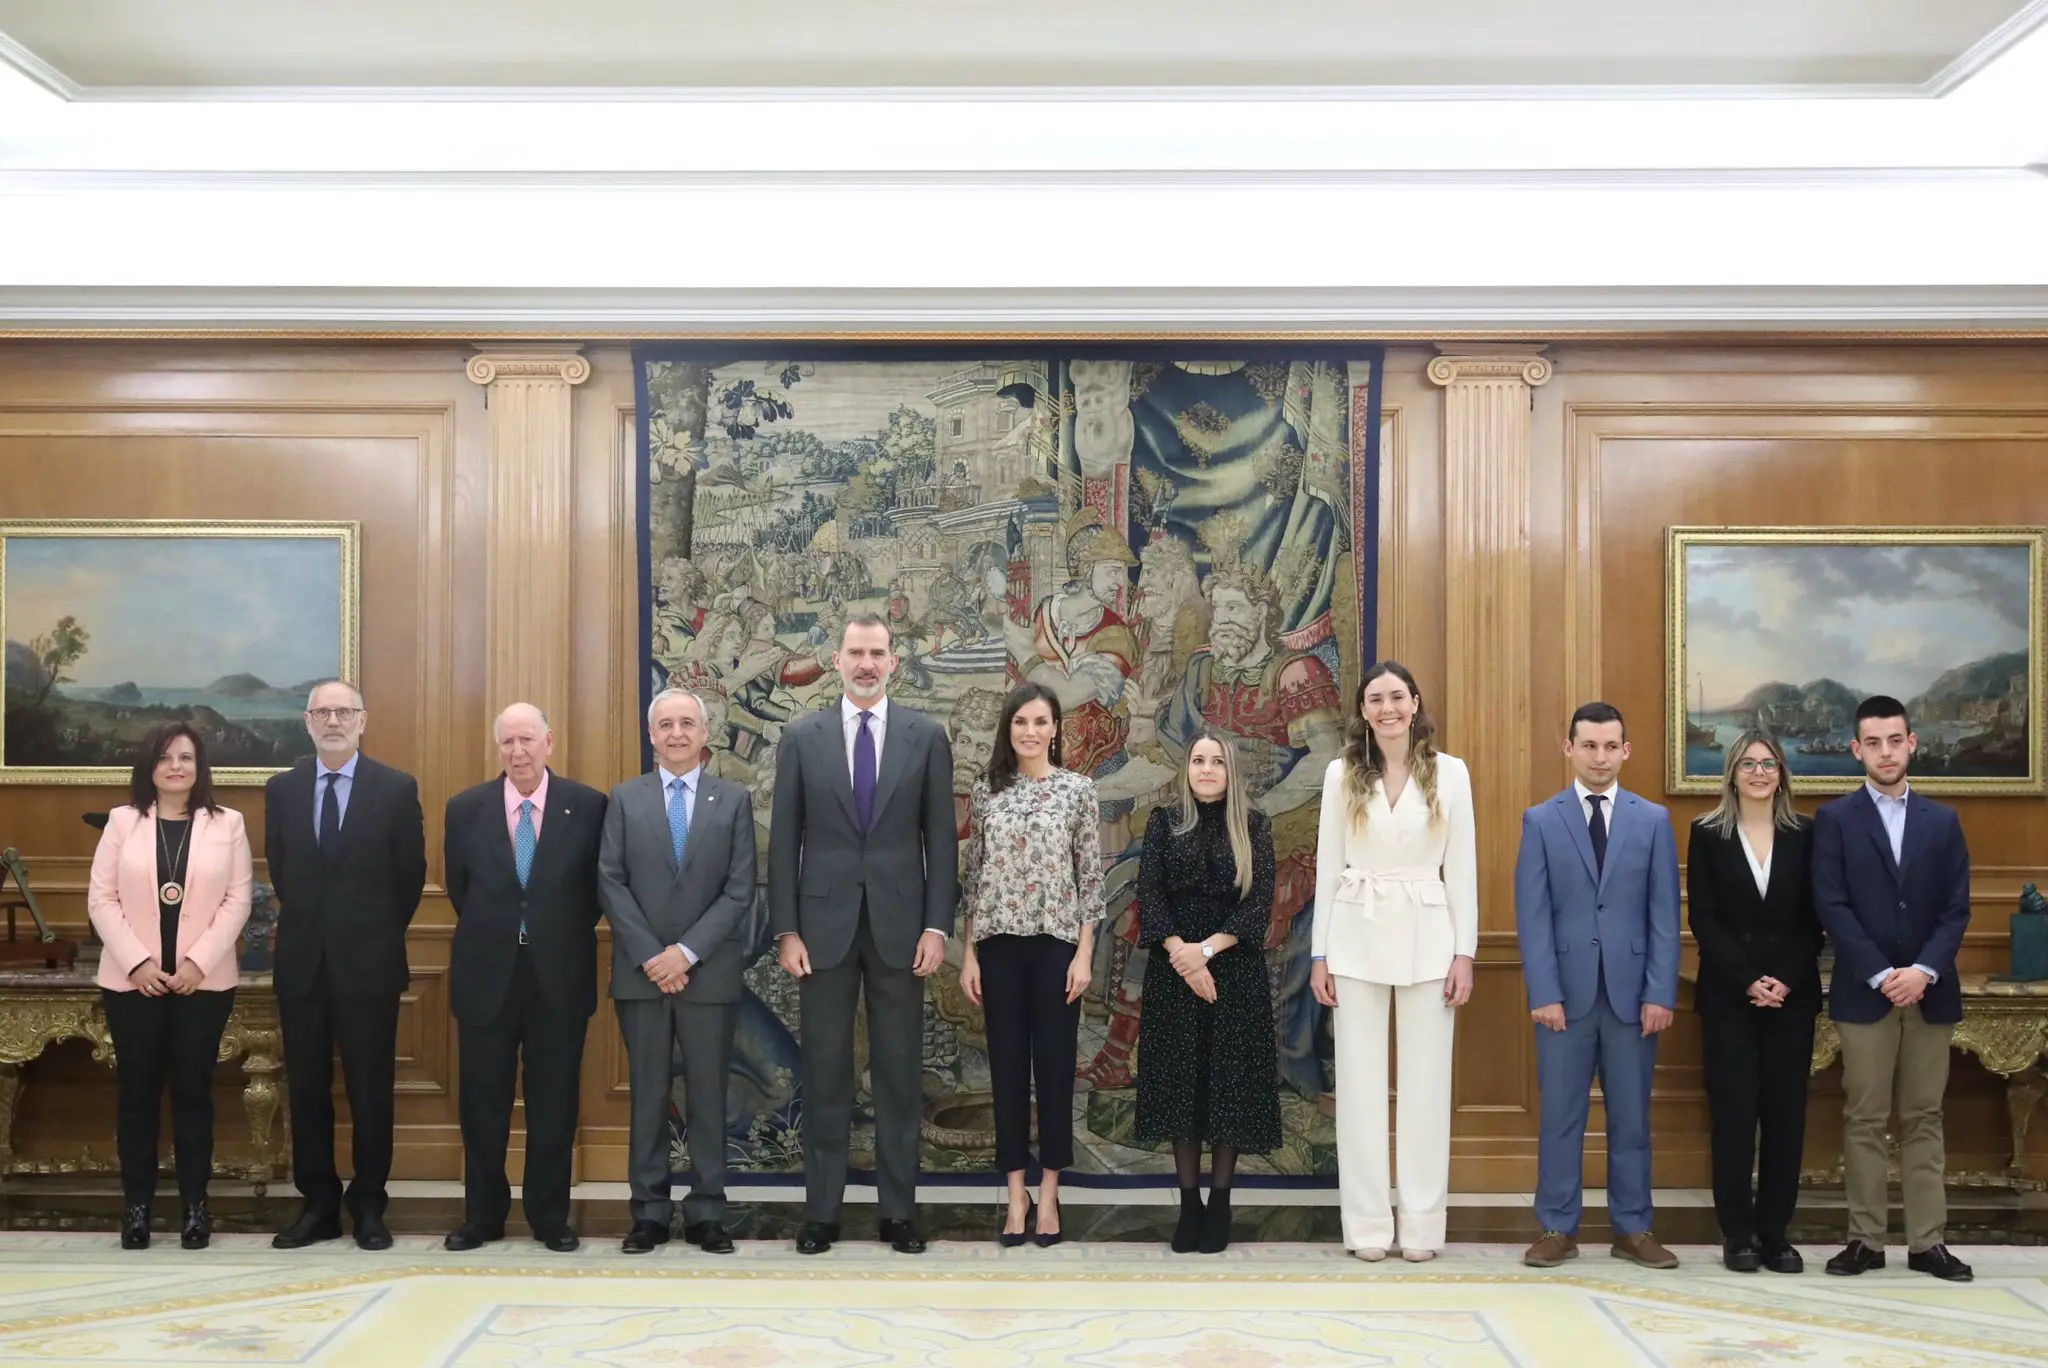 Queen Letizia received audience at palace